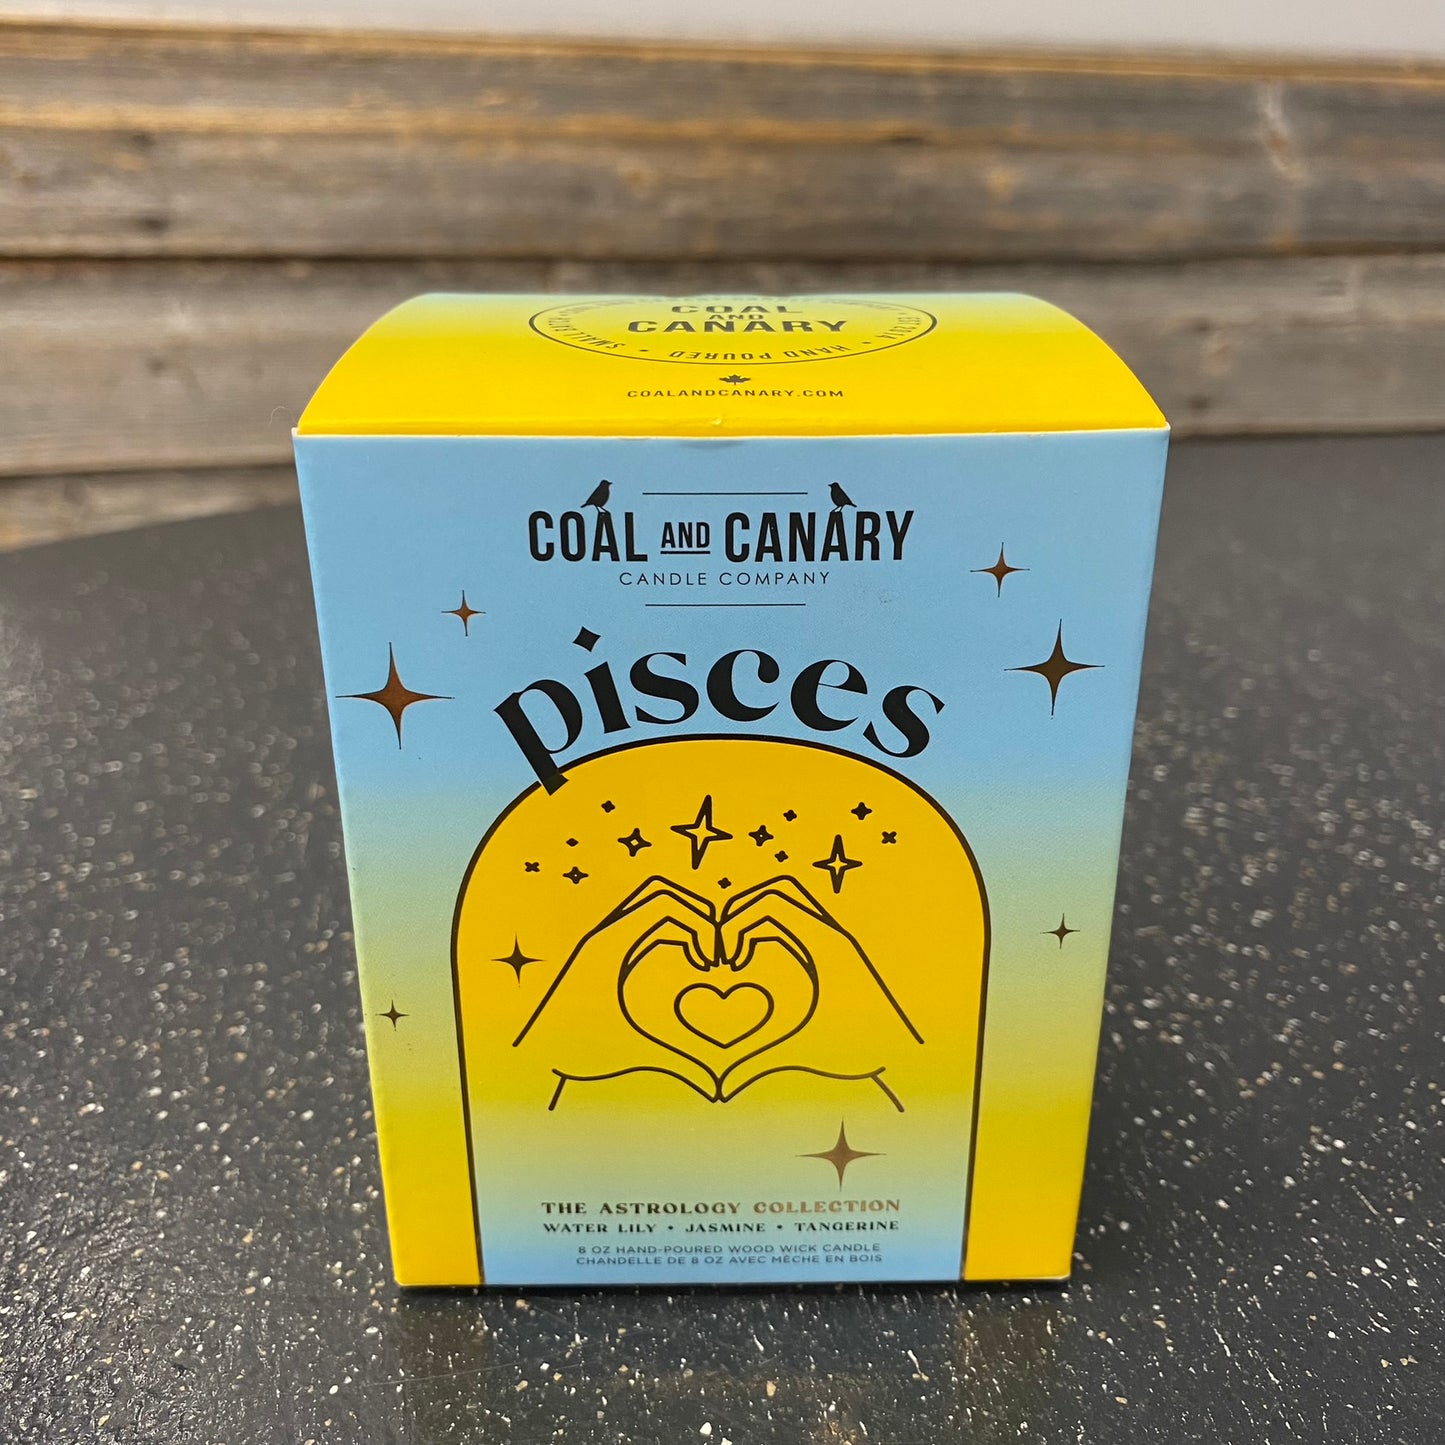 Pisces by Coal & Canary